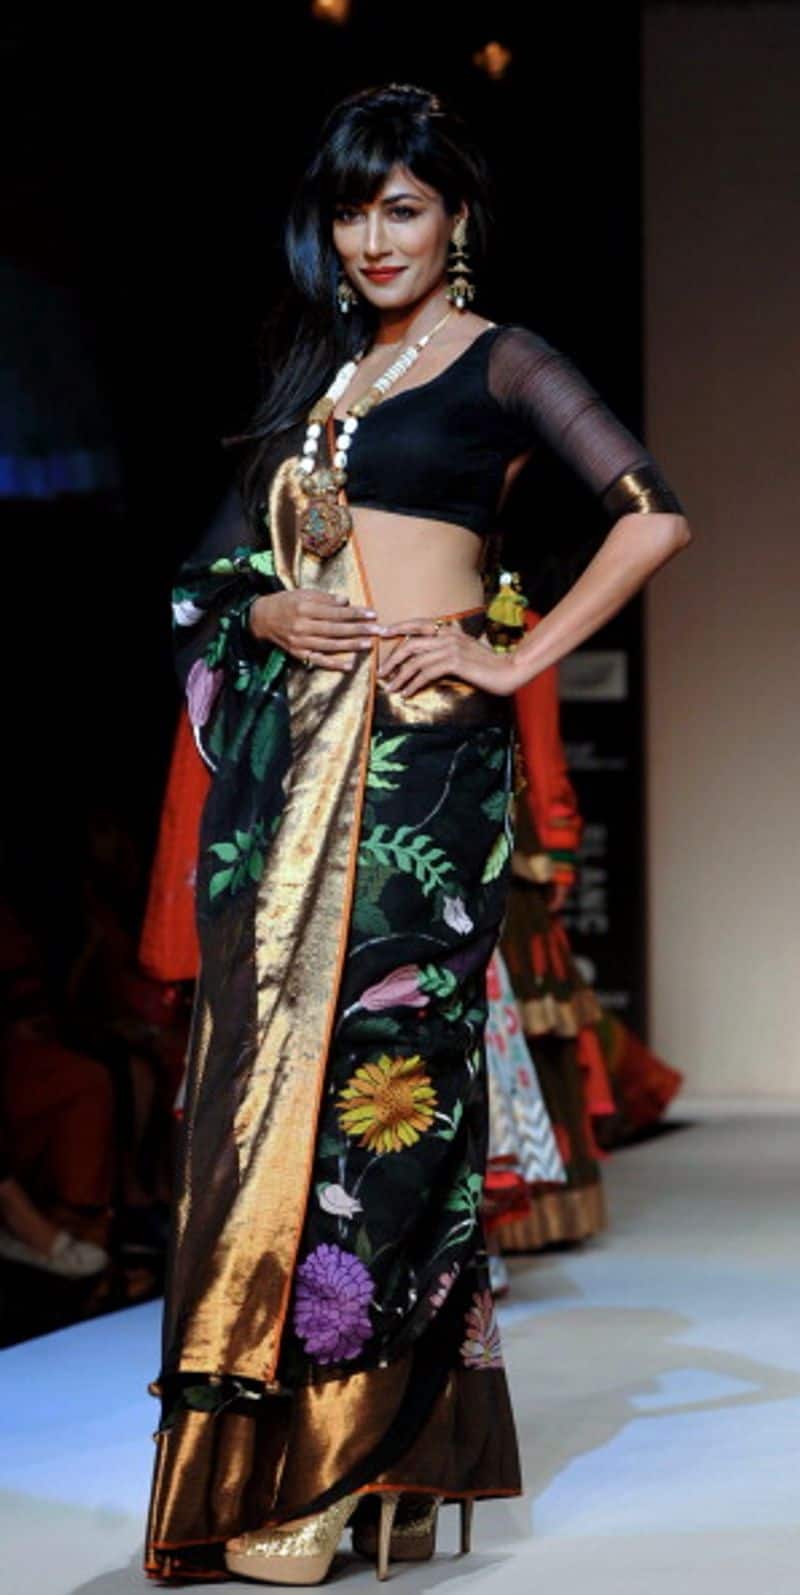 Take a cue from this Gaurang sari to opt for a sheer sleeved blouse with embellished border to switch things up.